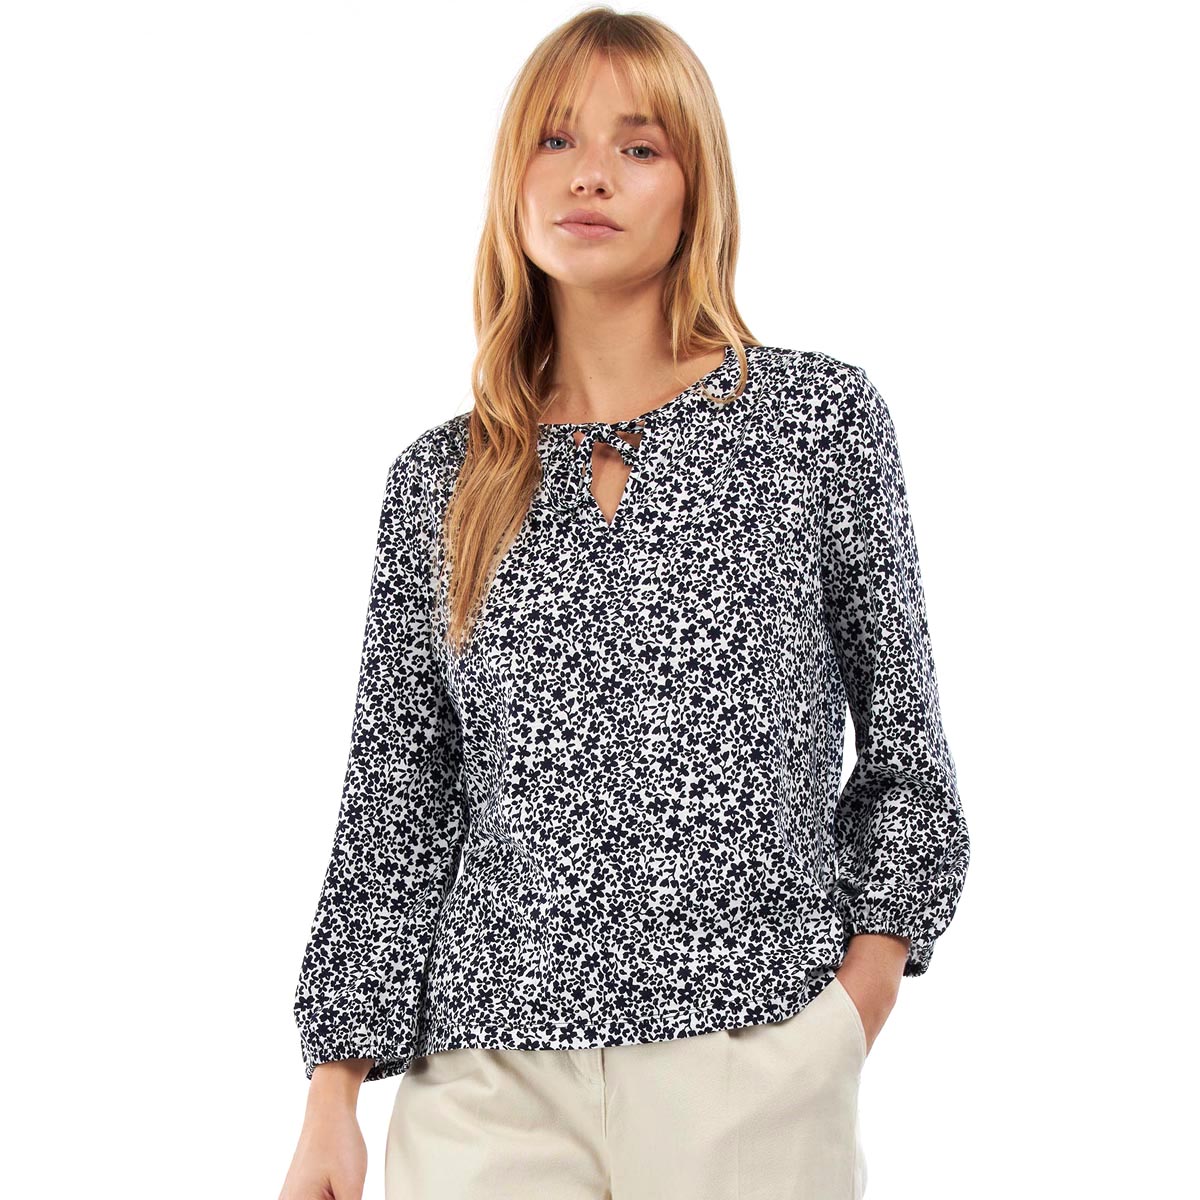 Barbour Women's Seaholly Top